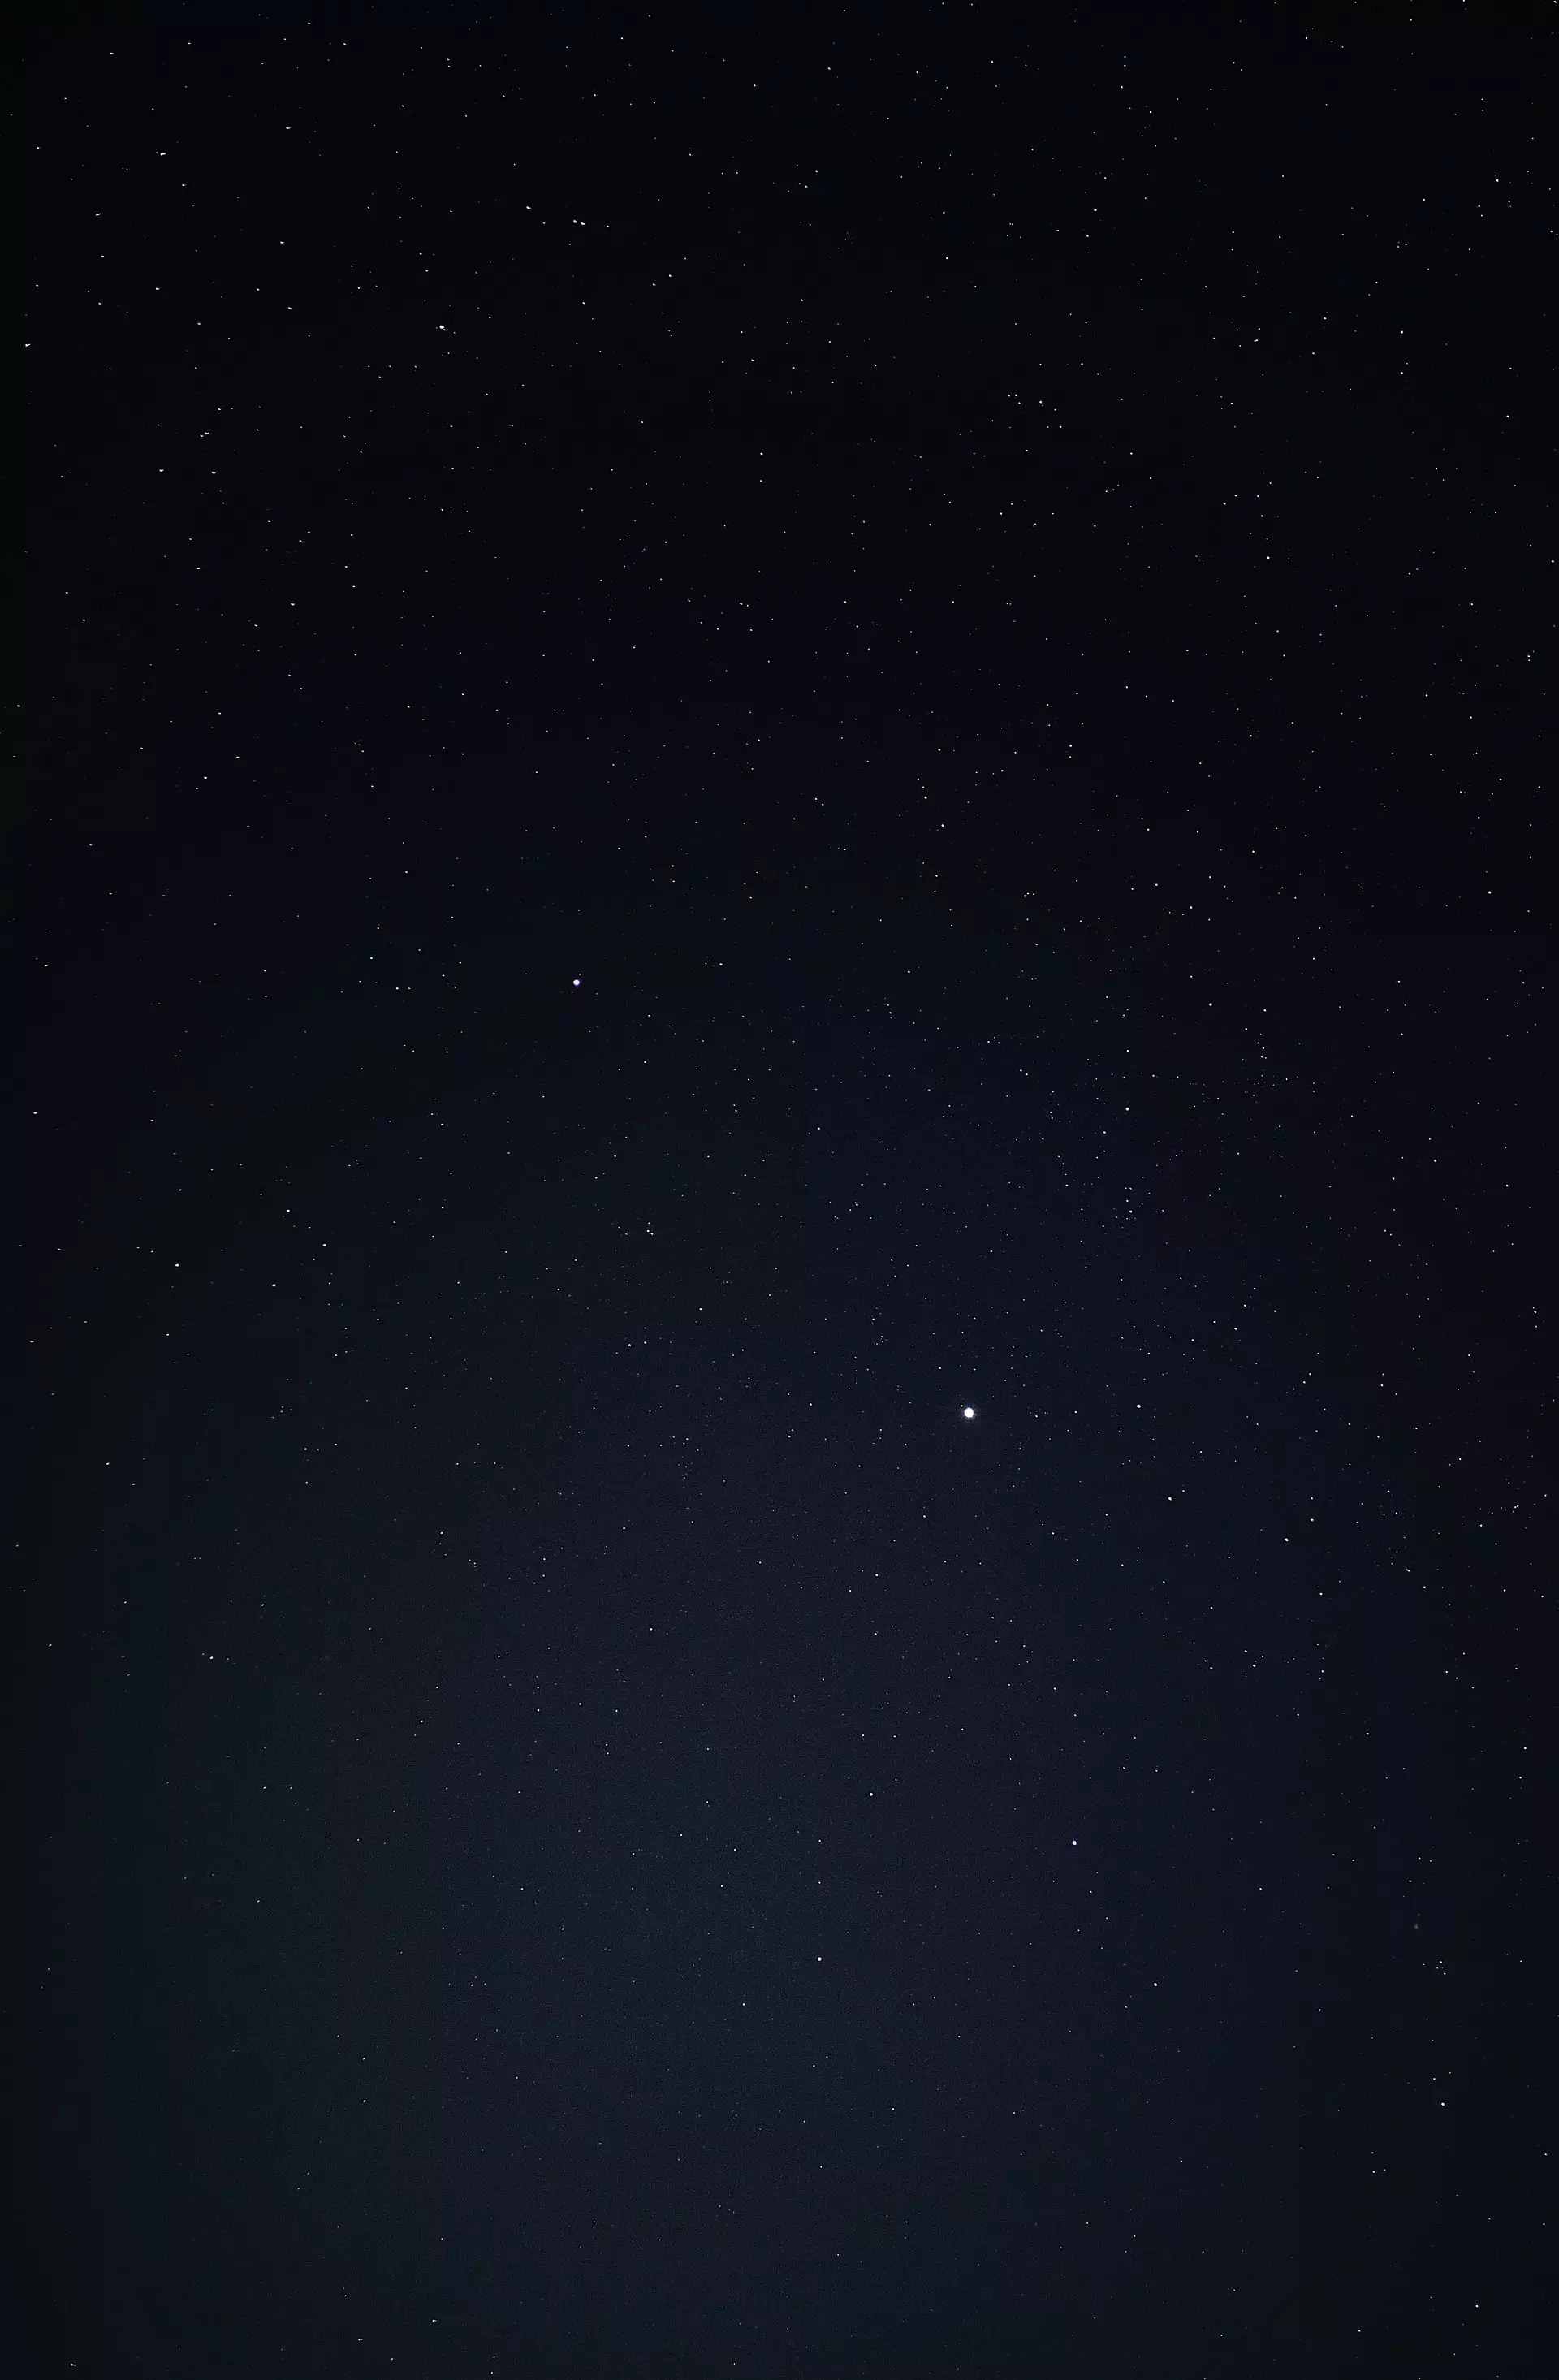 Saturn and Jupiter as they usually appear (